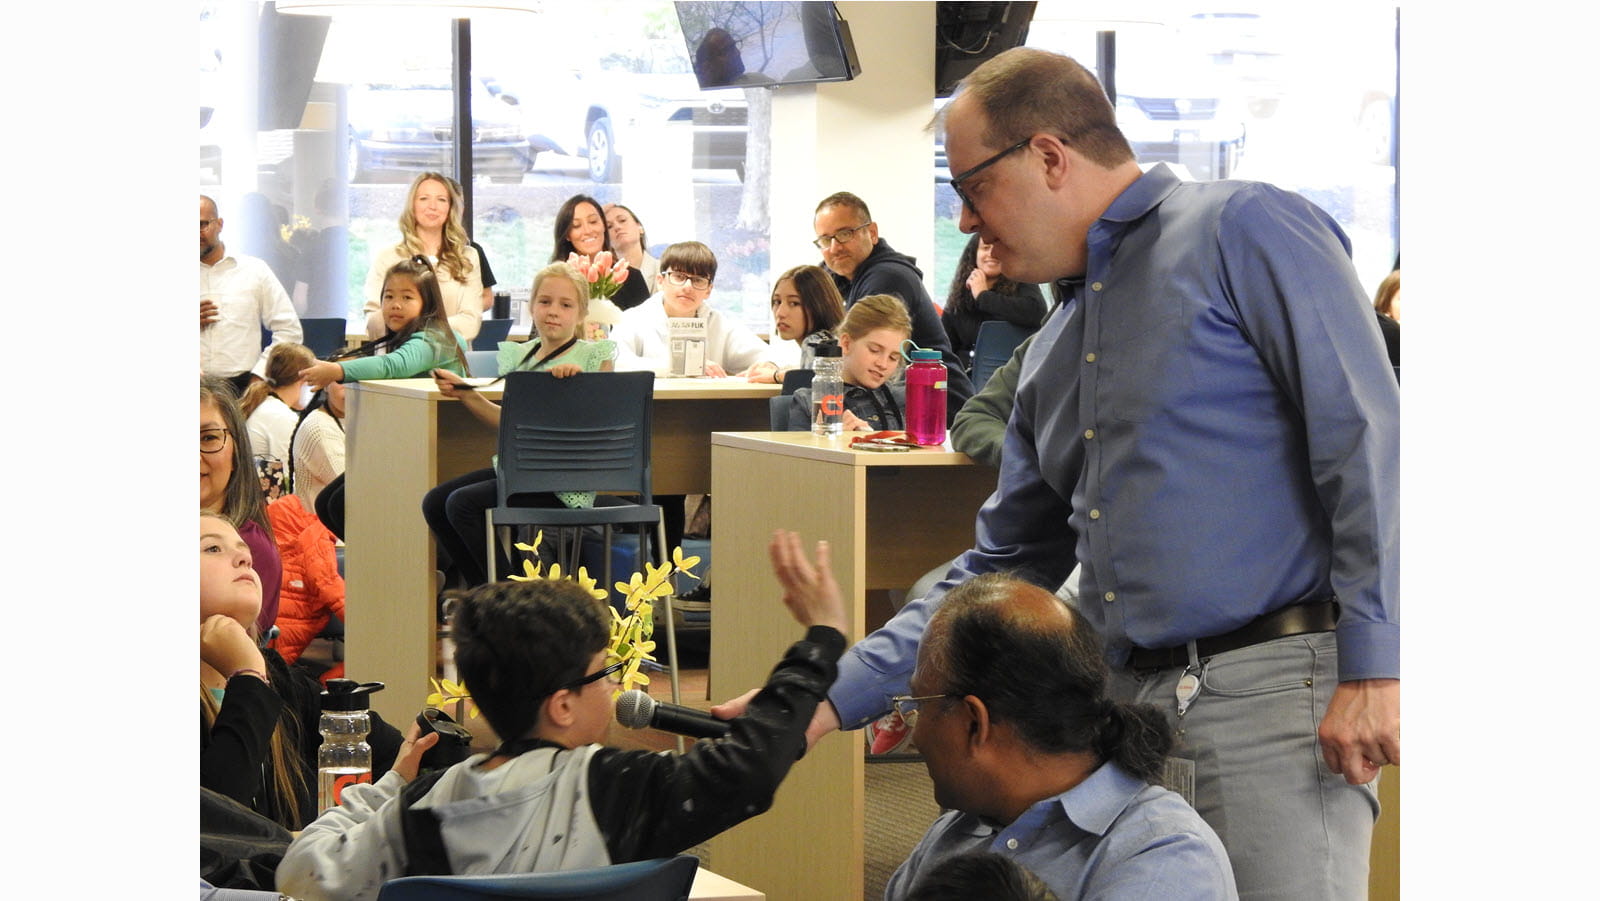 A young visitor speaks into a microphone during a Q&A during Take Our Daughters and Sons to Work Day.